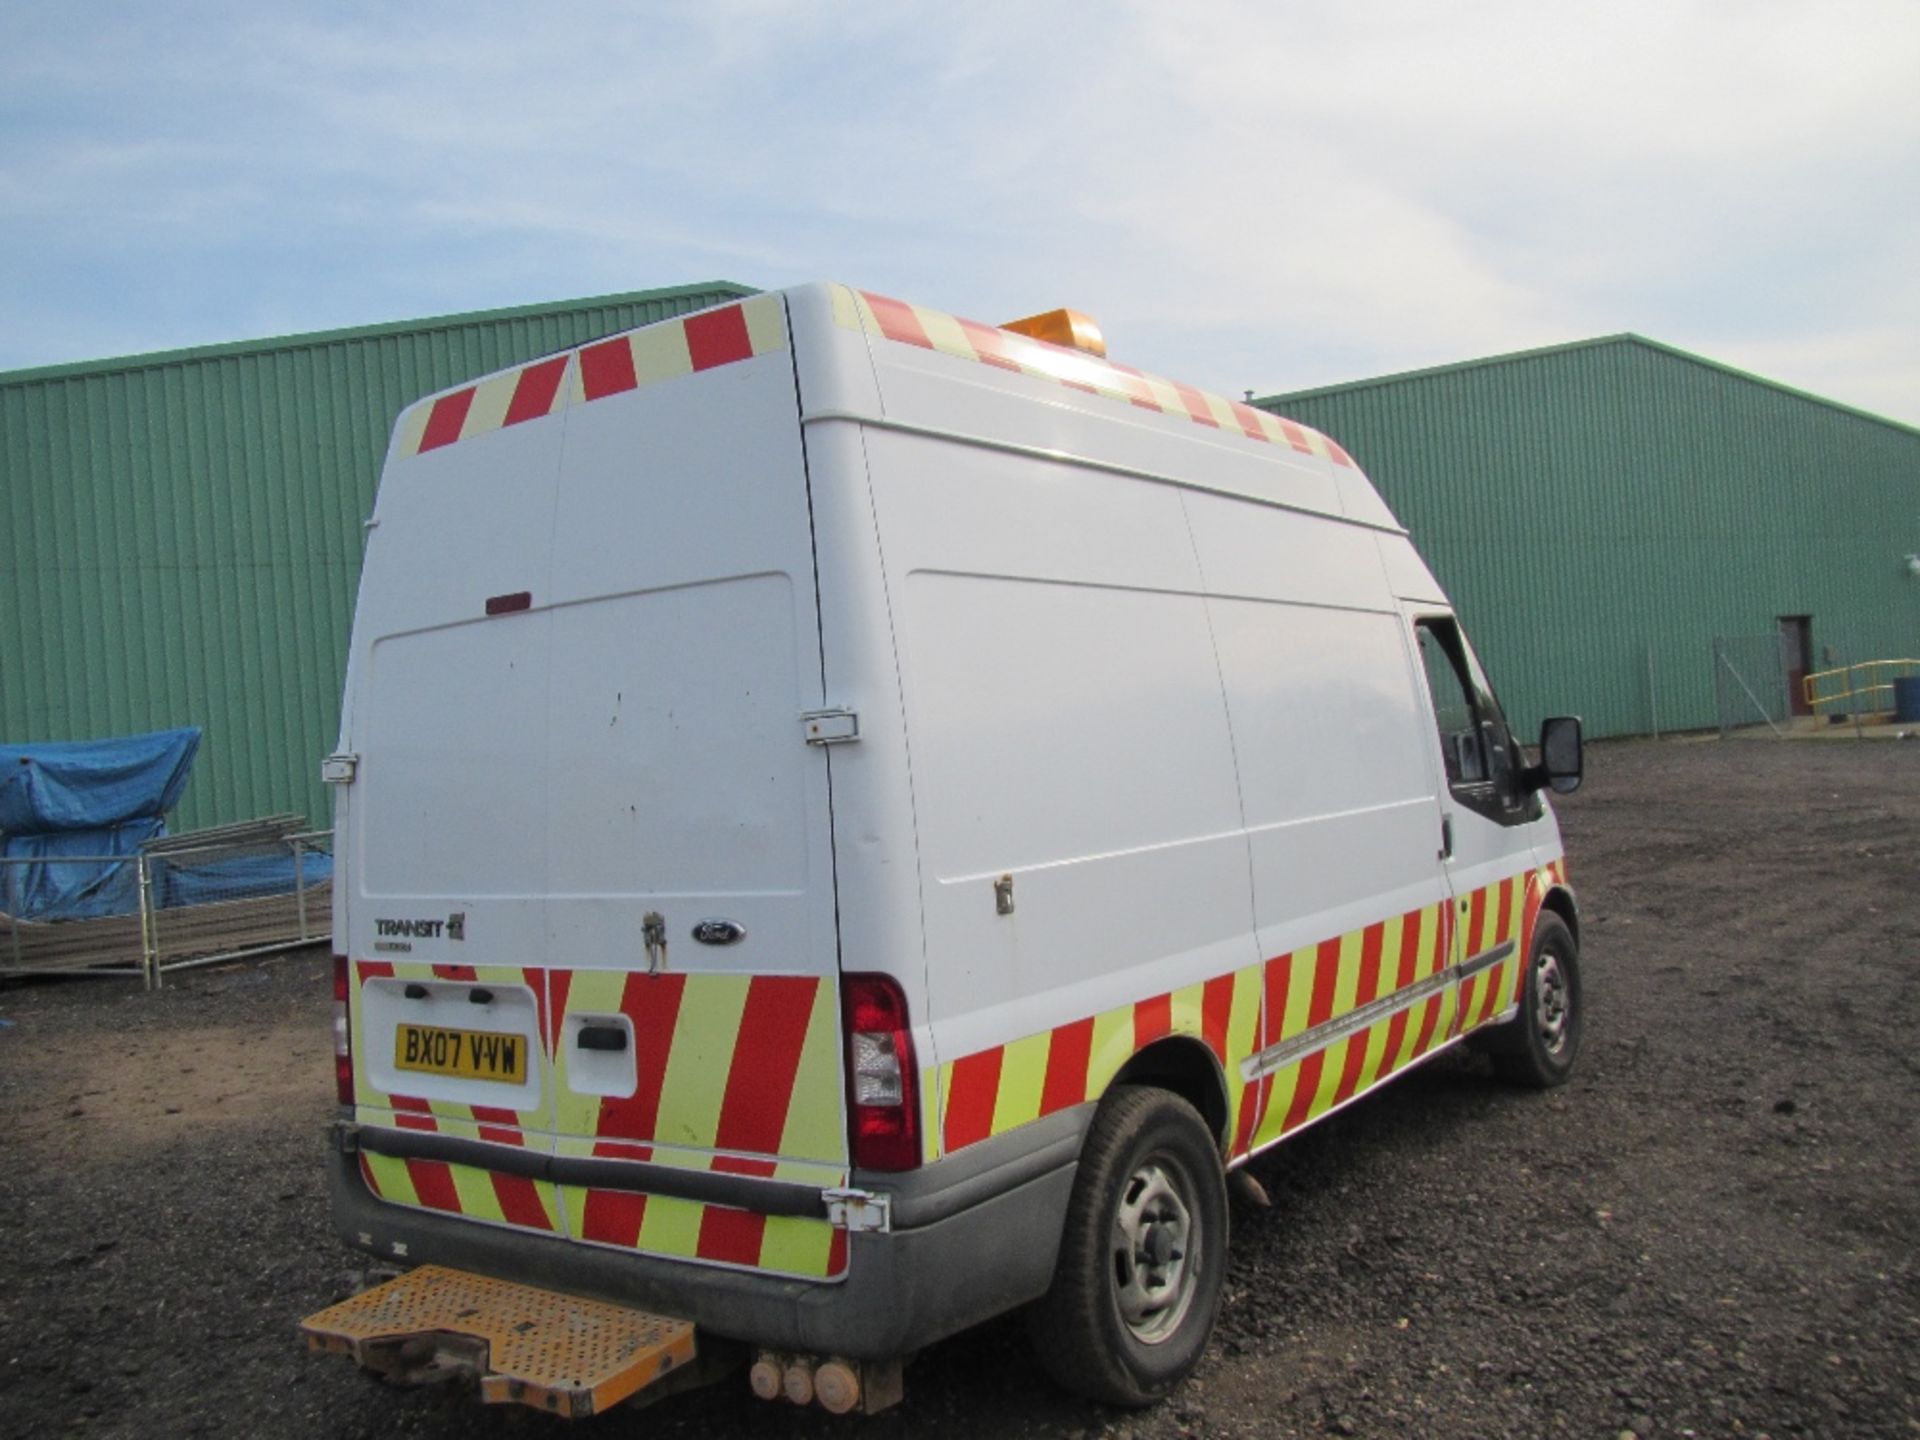 Ford Transit 350 MWB Van with High Roof, Compressor & Generator Built In. Ideal Fitters Van. V5 will - Image 6 of 6